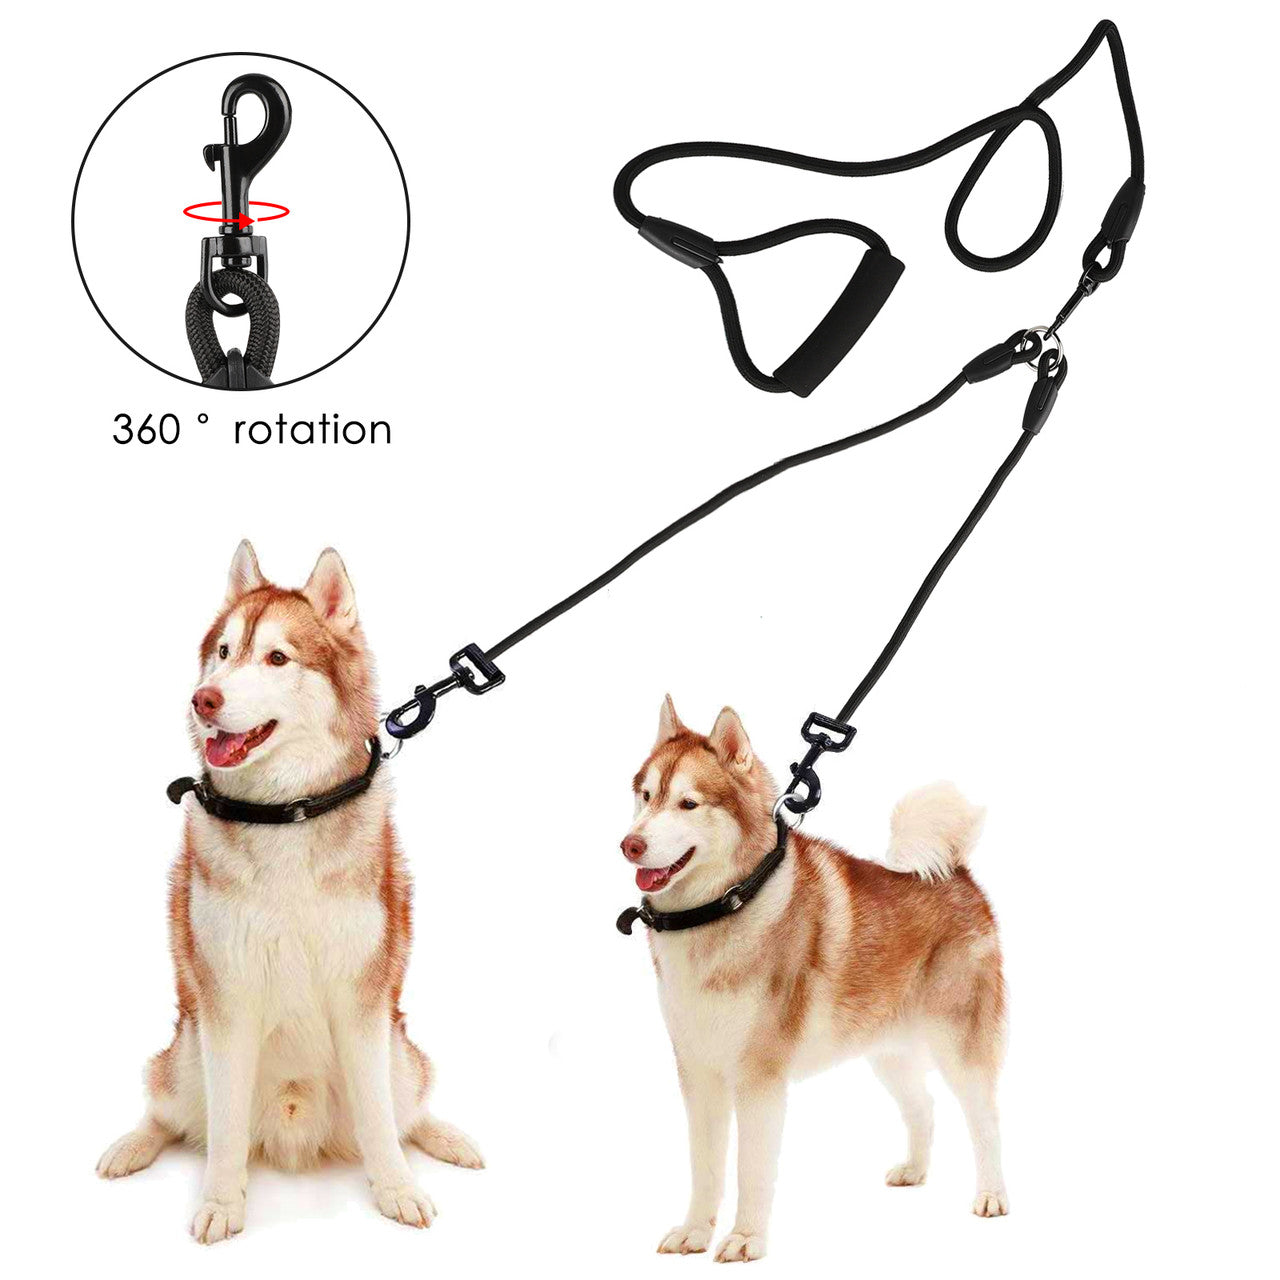 Double Dog Leash, Adjustable Heavy Duty Double Leash for Dogs Dual Dog Leash 360掳Tangle Free & Soft Handle Two Dog Leash, Walking & Training Leash Two Dogs,fit for Medium Dogs